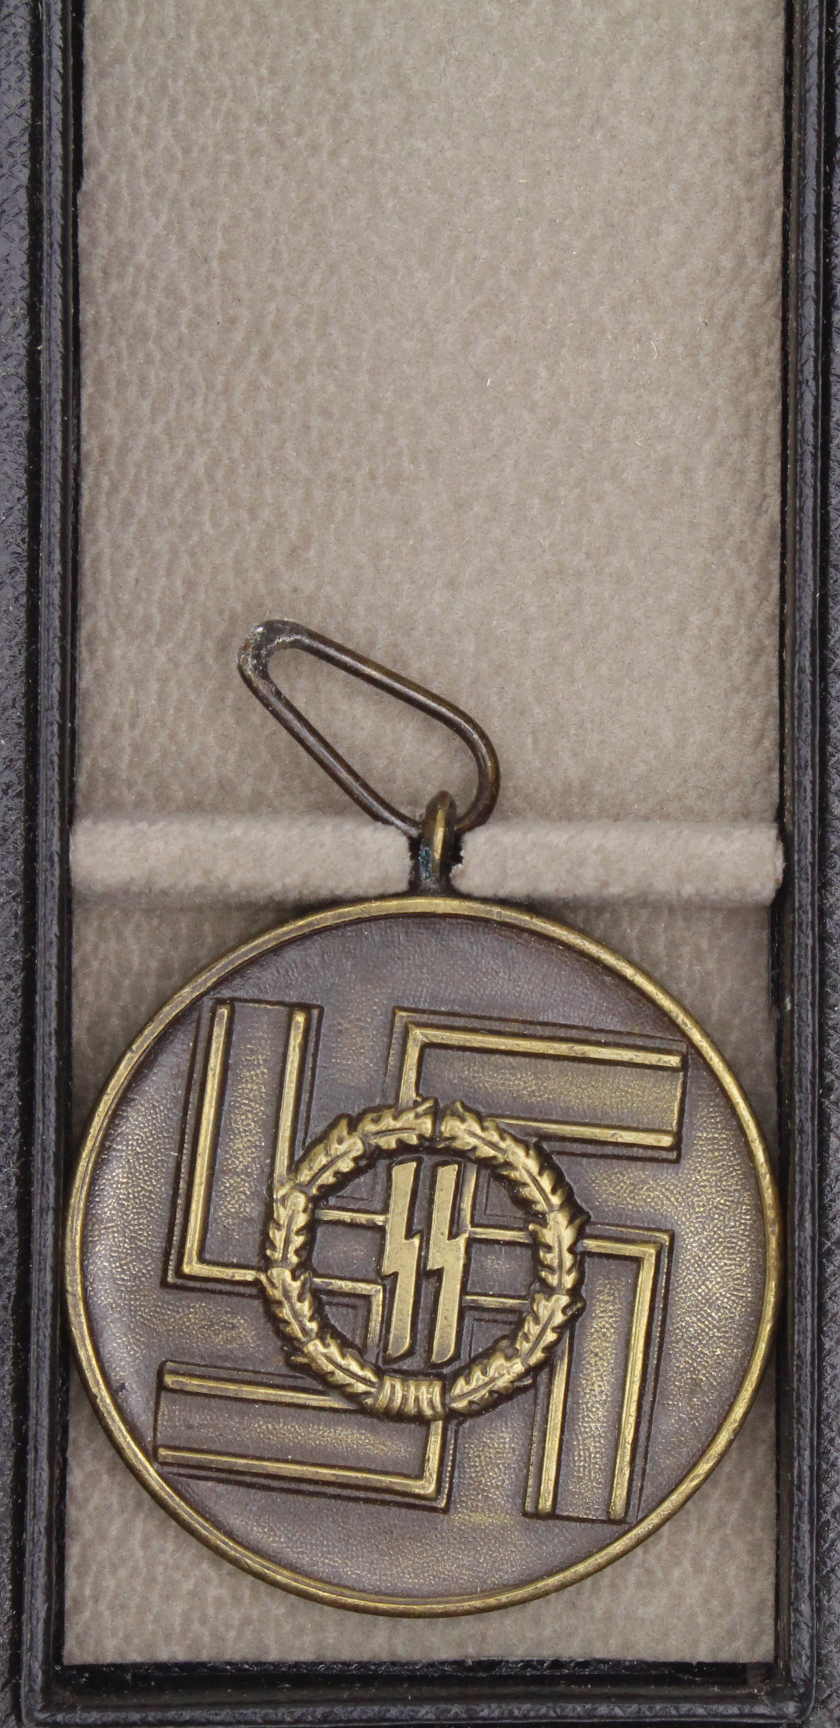 German 8 Year Service medal in case of issue.